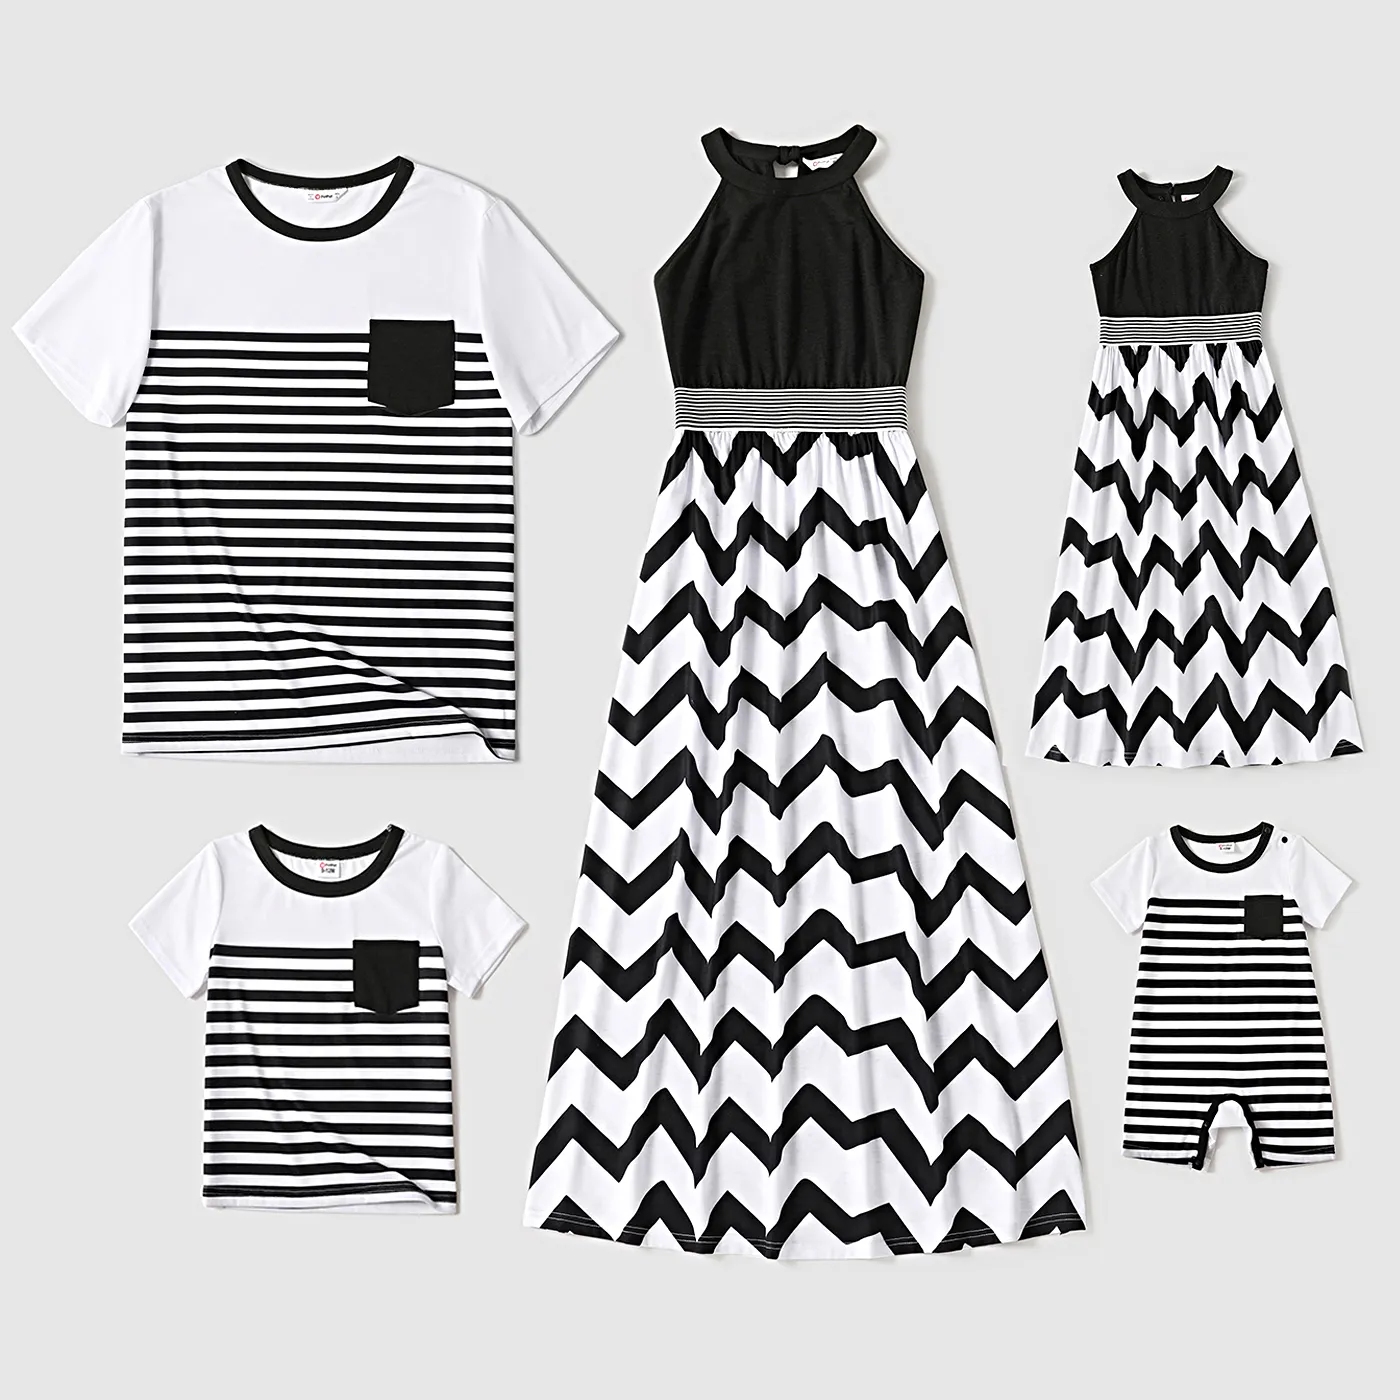 Family Matching Black Halter Neck Off Shoulder Splicing Chevron Striped Maxi Dresses And Short-sleeve T-shirts Sets